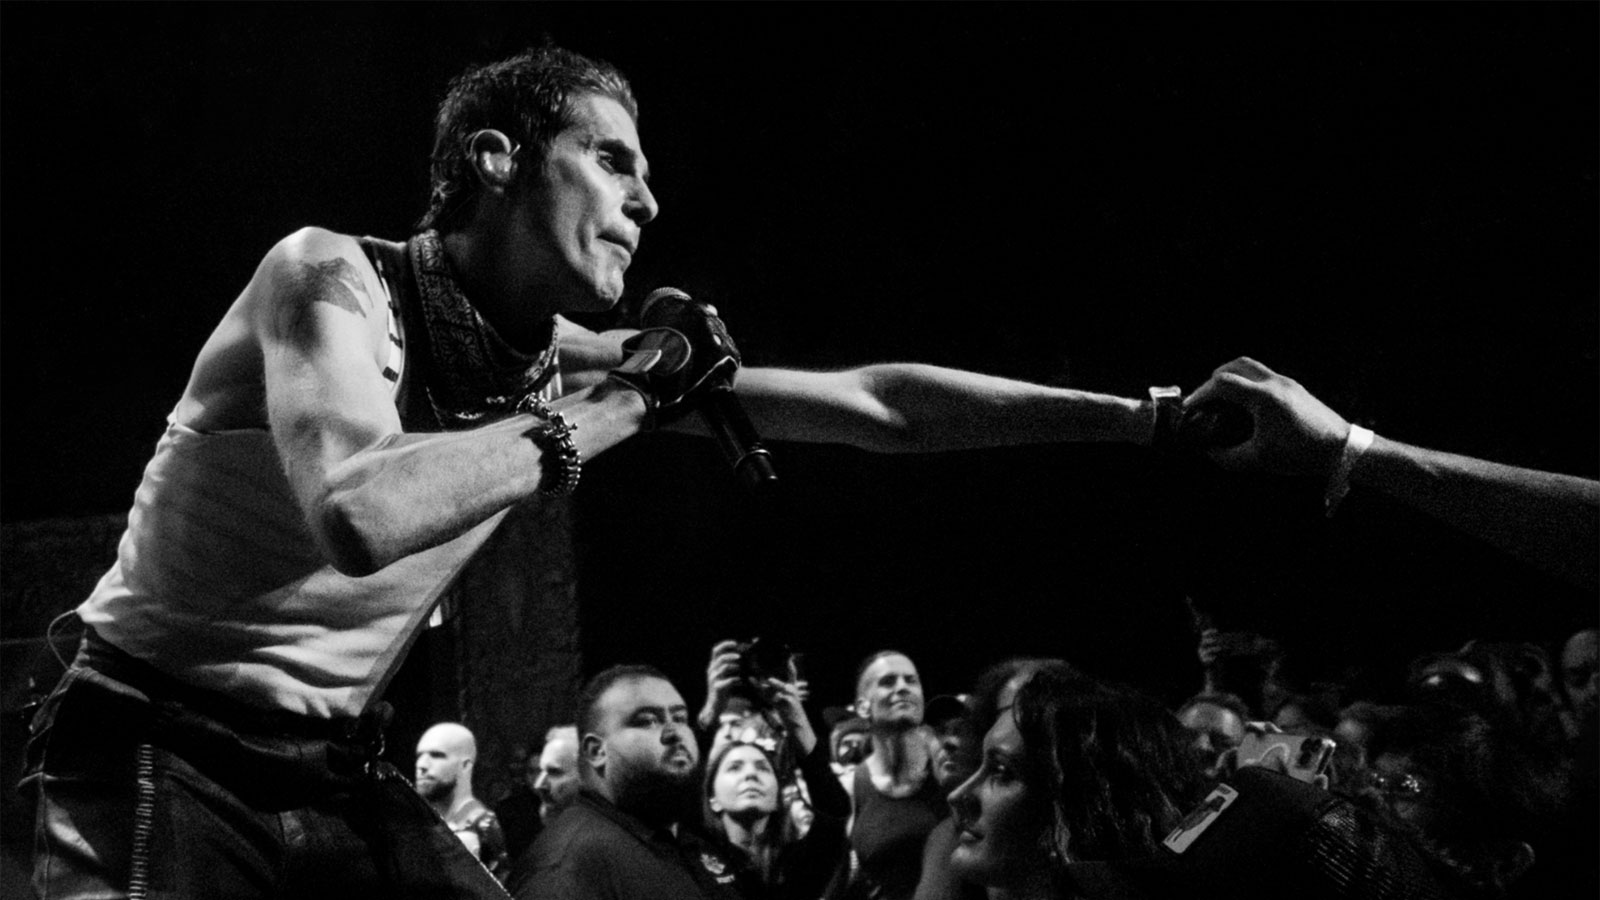 PERRY FARRELL talks PORNO FOR PYROS farewell tour, new song and more ...